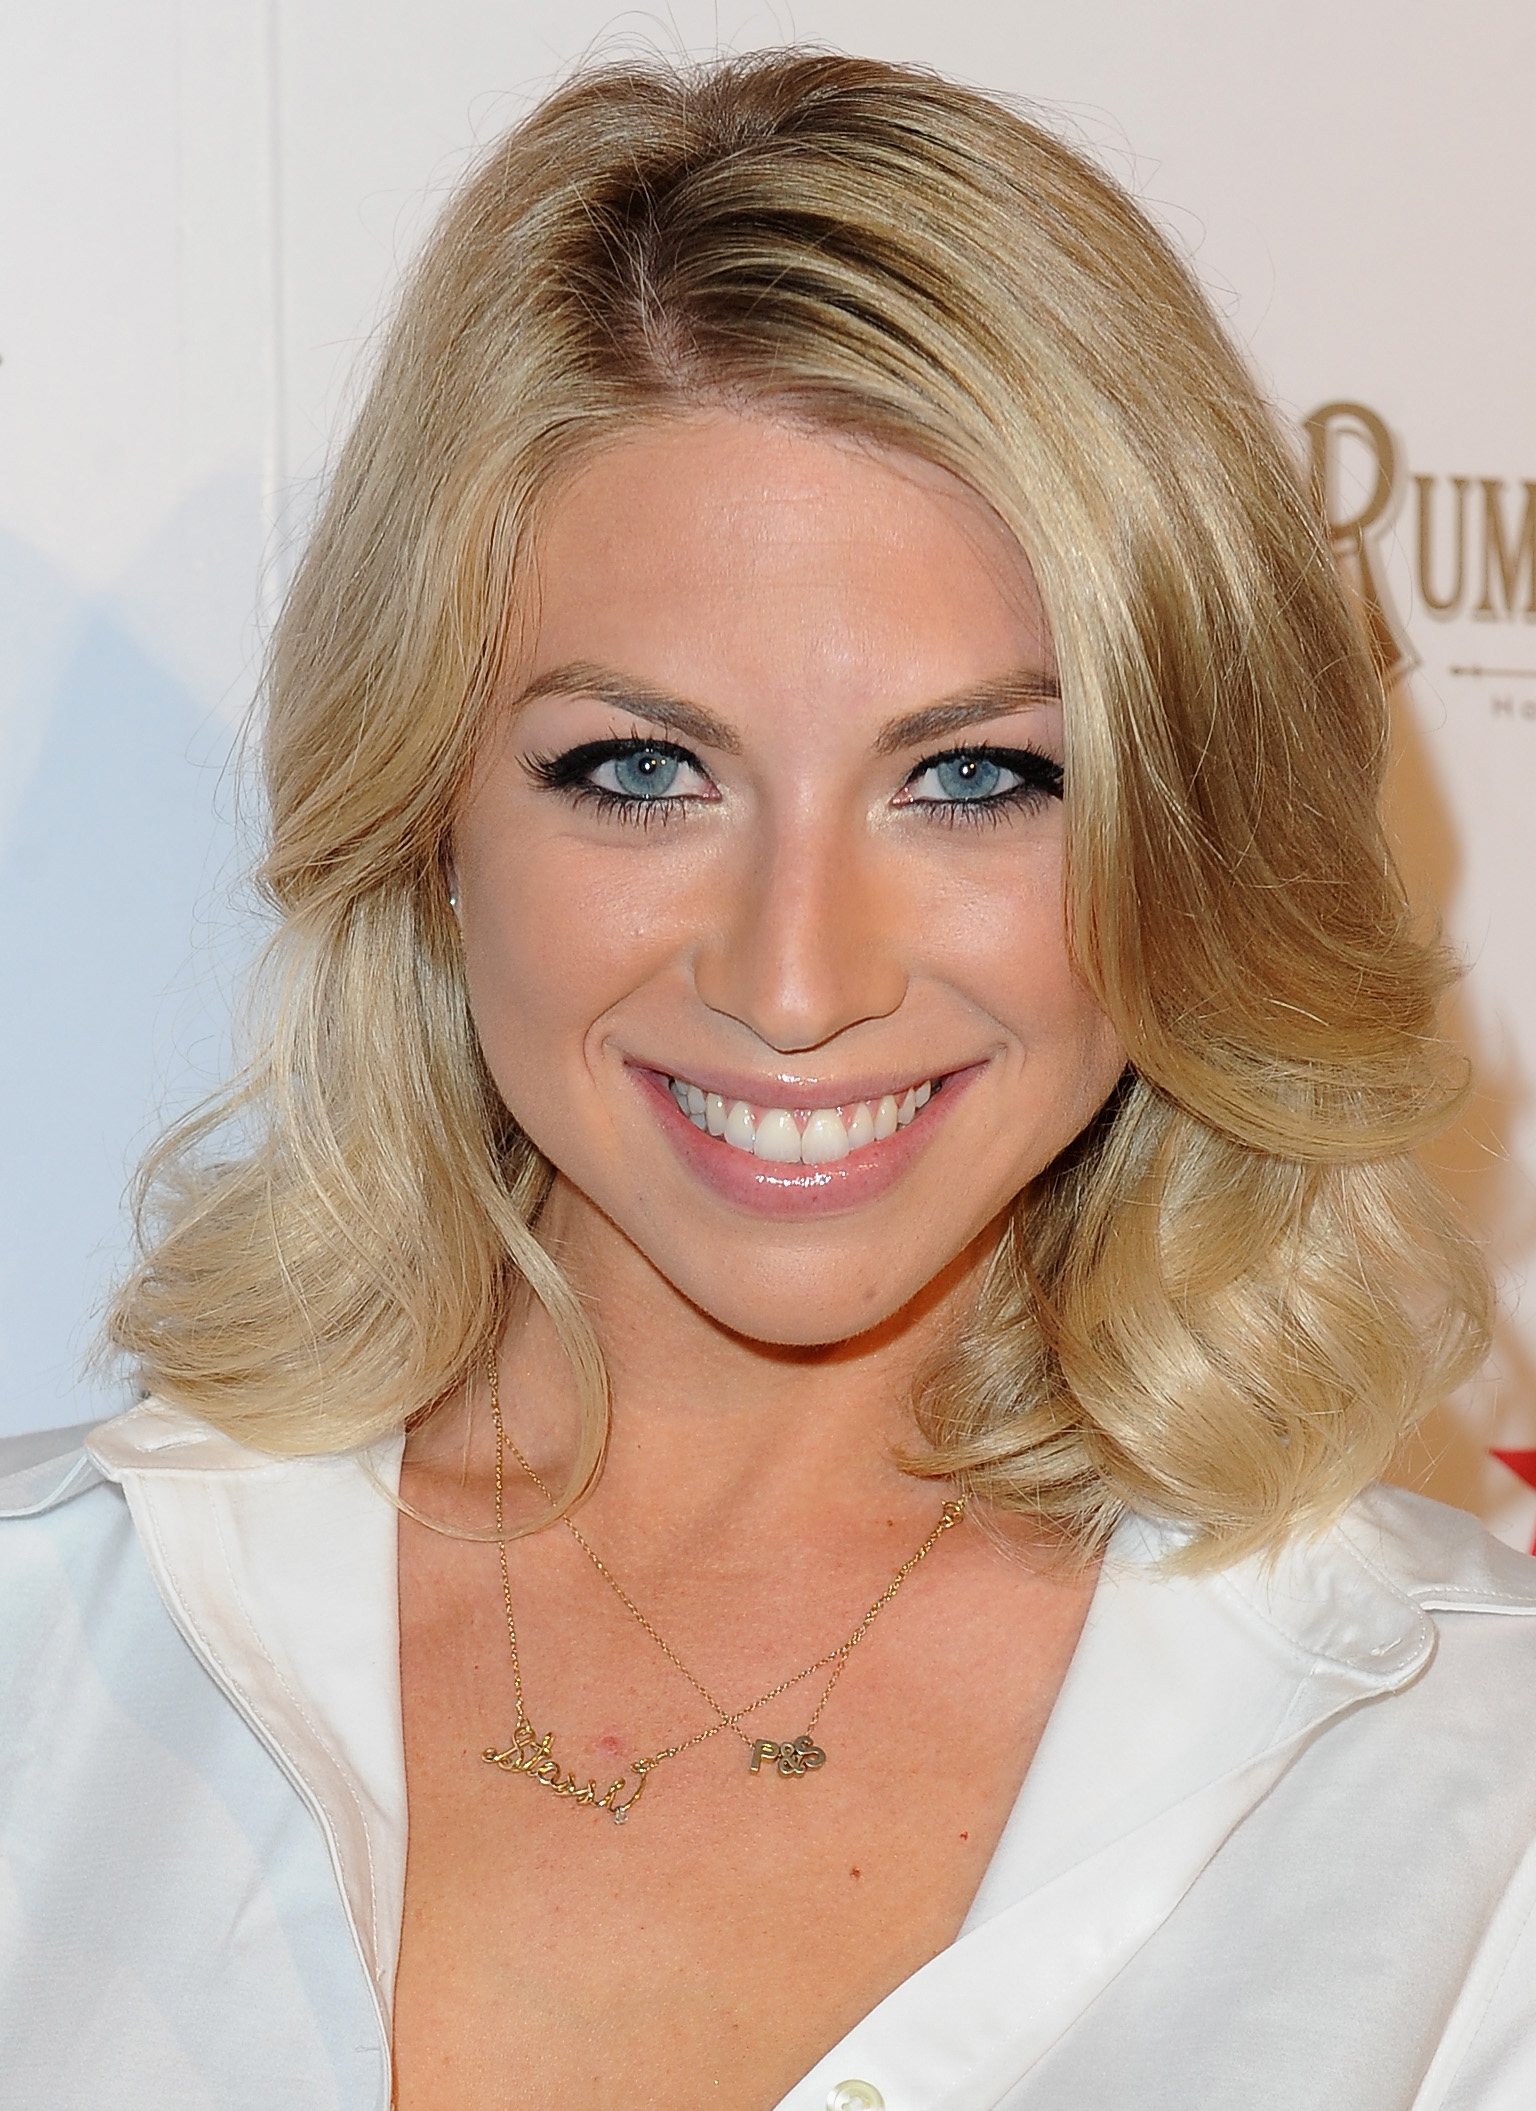 Is Stassi Still With Her BF After 'Pump' Drama? 